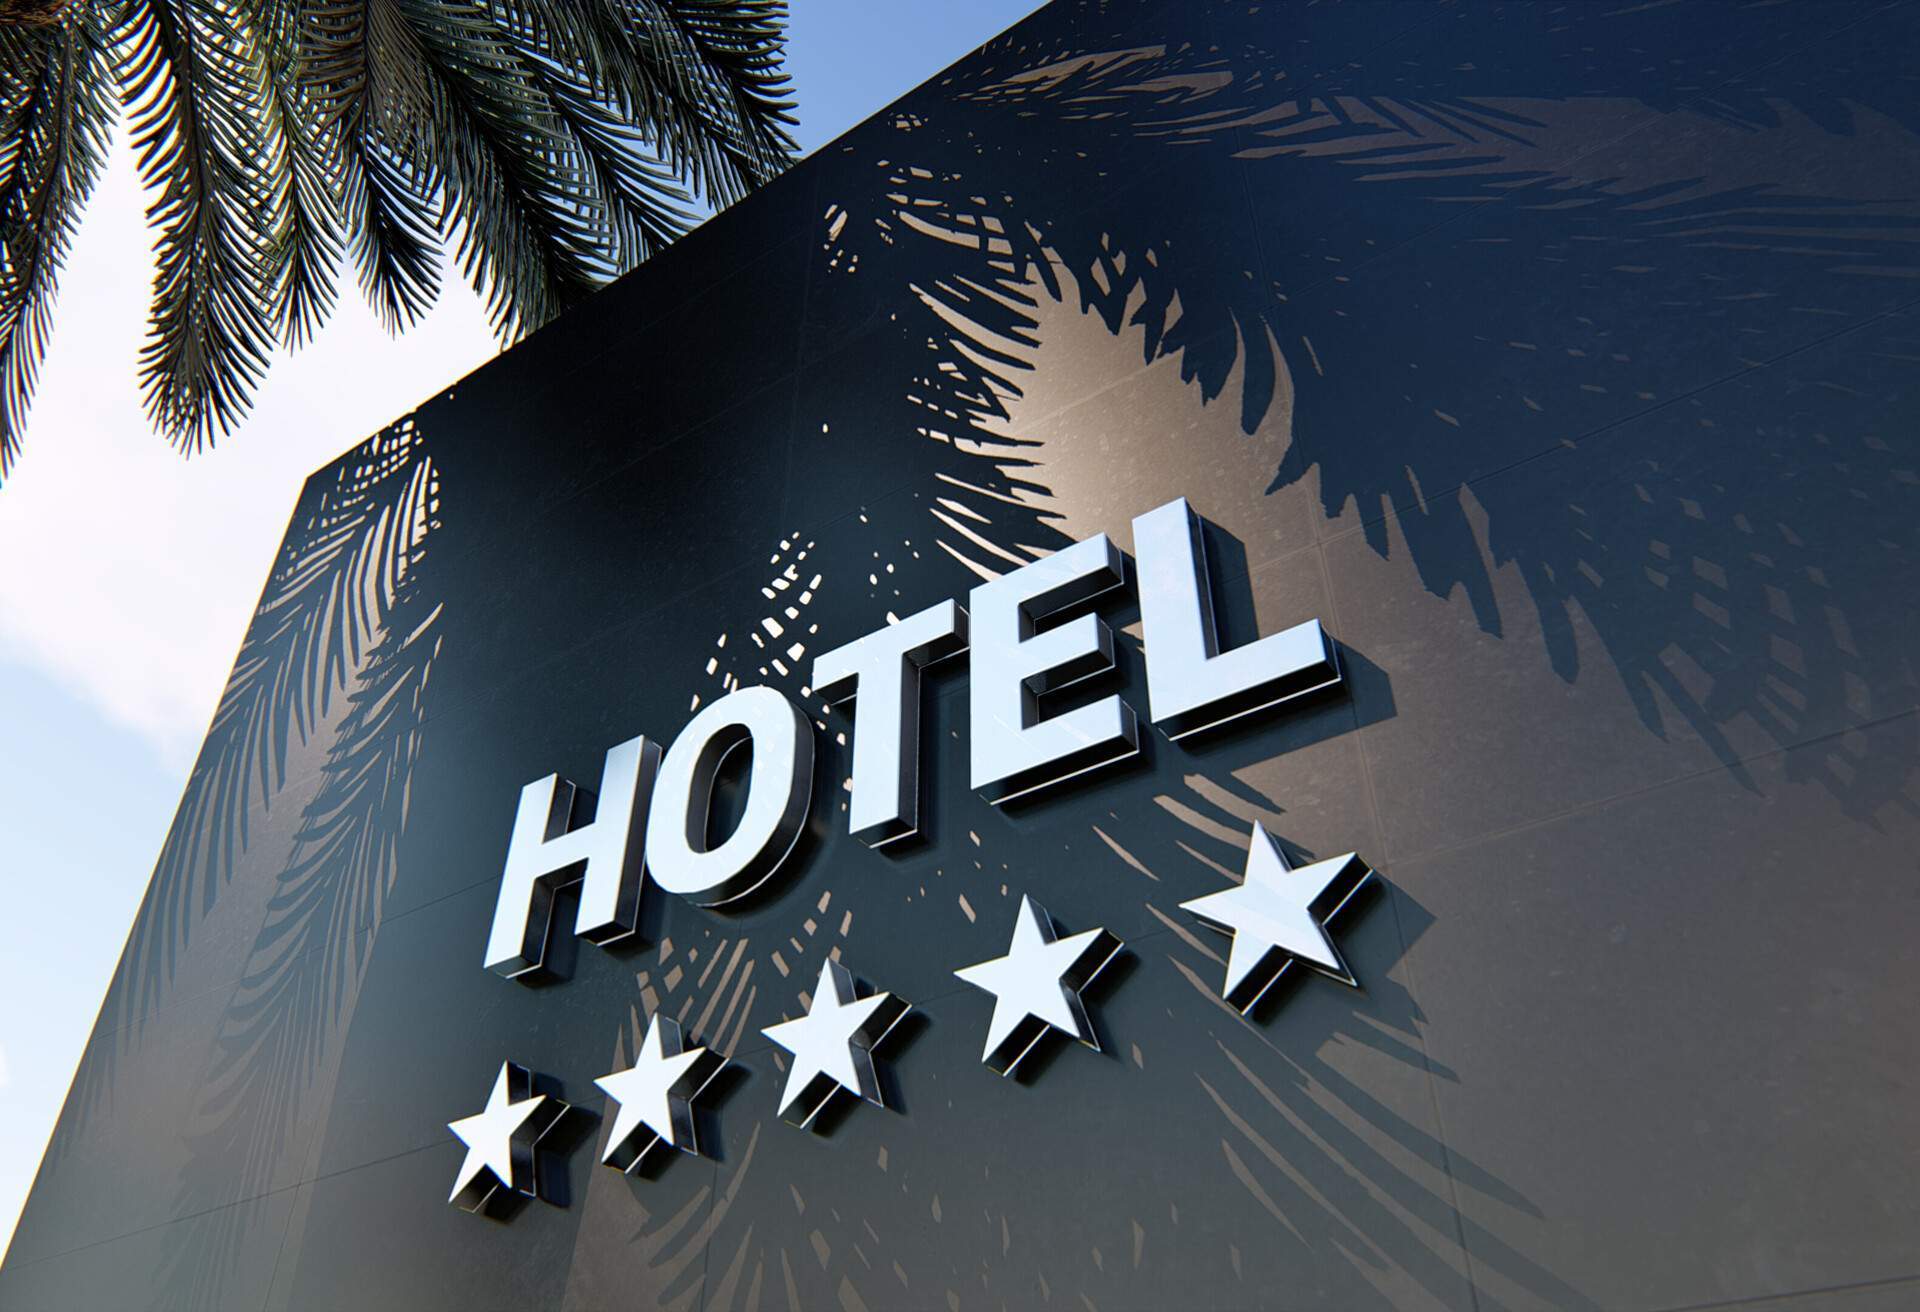 THEME_HOTEL_SIGN_FIVE_STARS_FACADE_BUILDING_GettyImages-1320779330-3-3.jpg